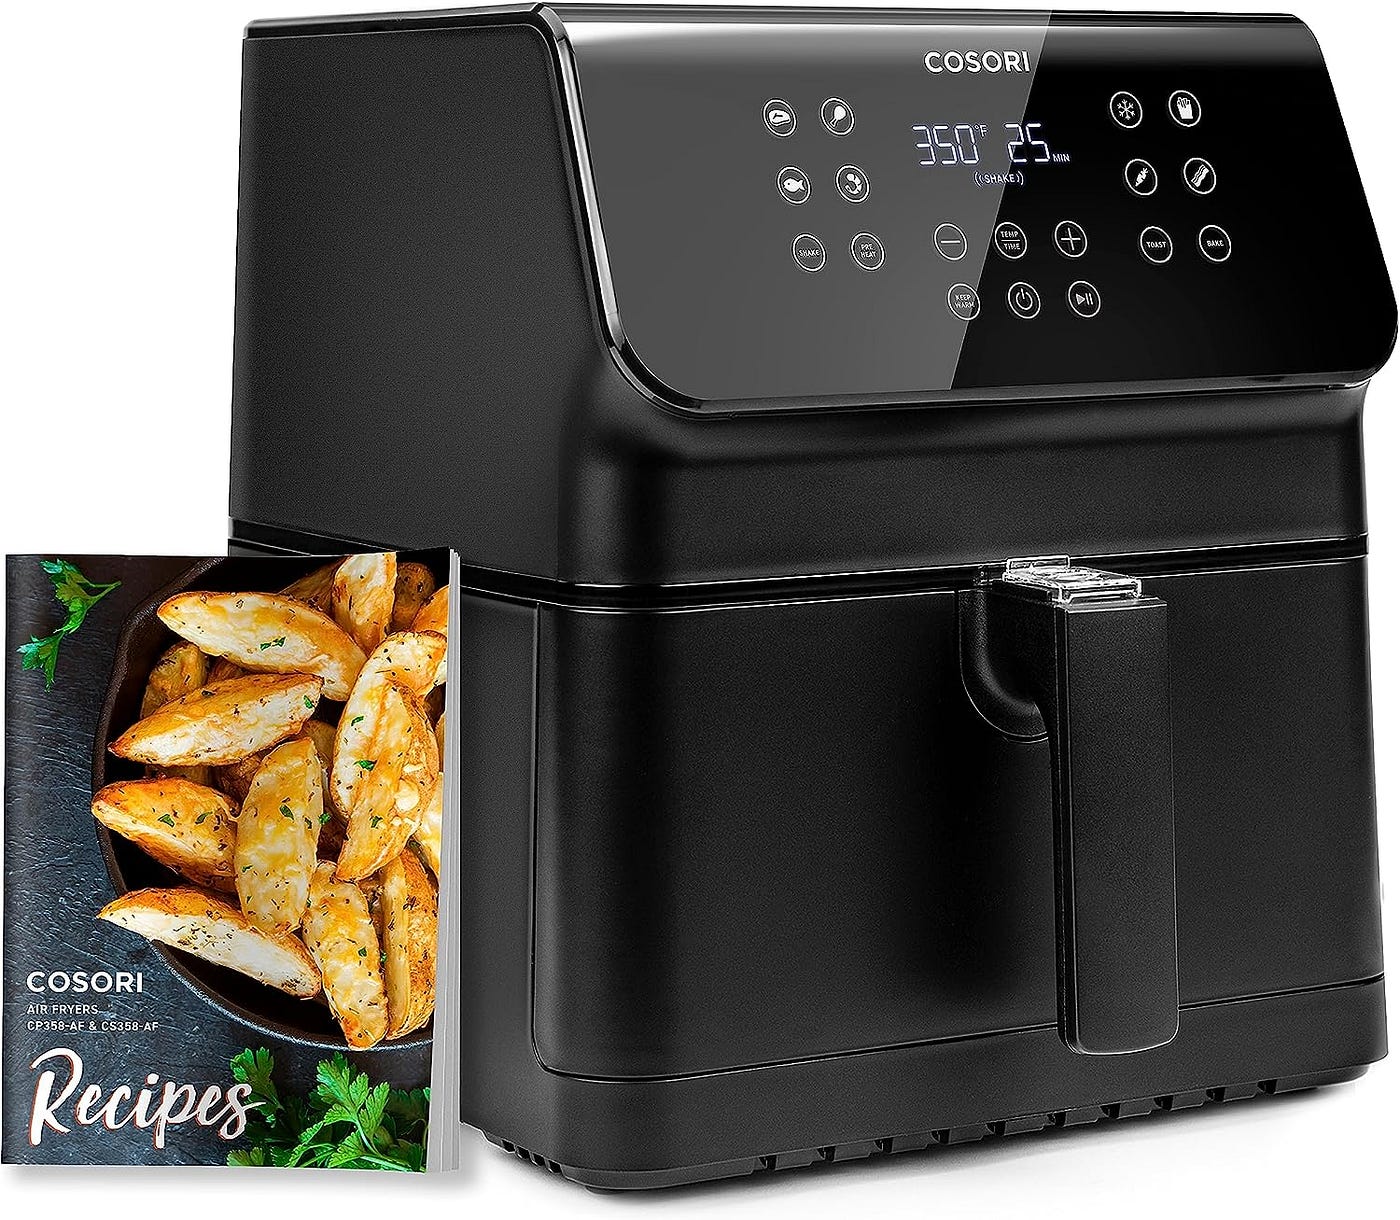 COSORI CP358-AF Cosori Air Fryer Oven Combo 5.8Qt Max Xl Large Cooker  (Cookbook With 100 Recipes), Customizable 10 Presets To Set Your Preferred